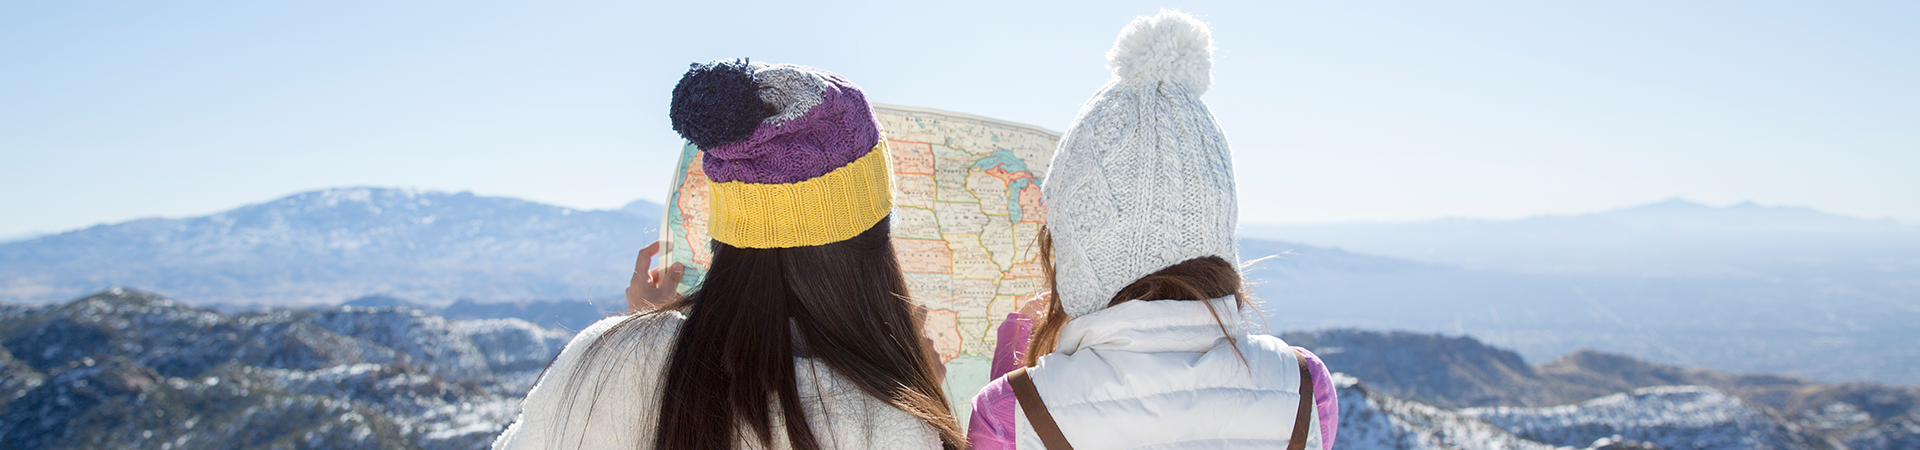  two girls in winter gear standing on a mountain looking at a map 